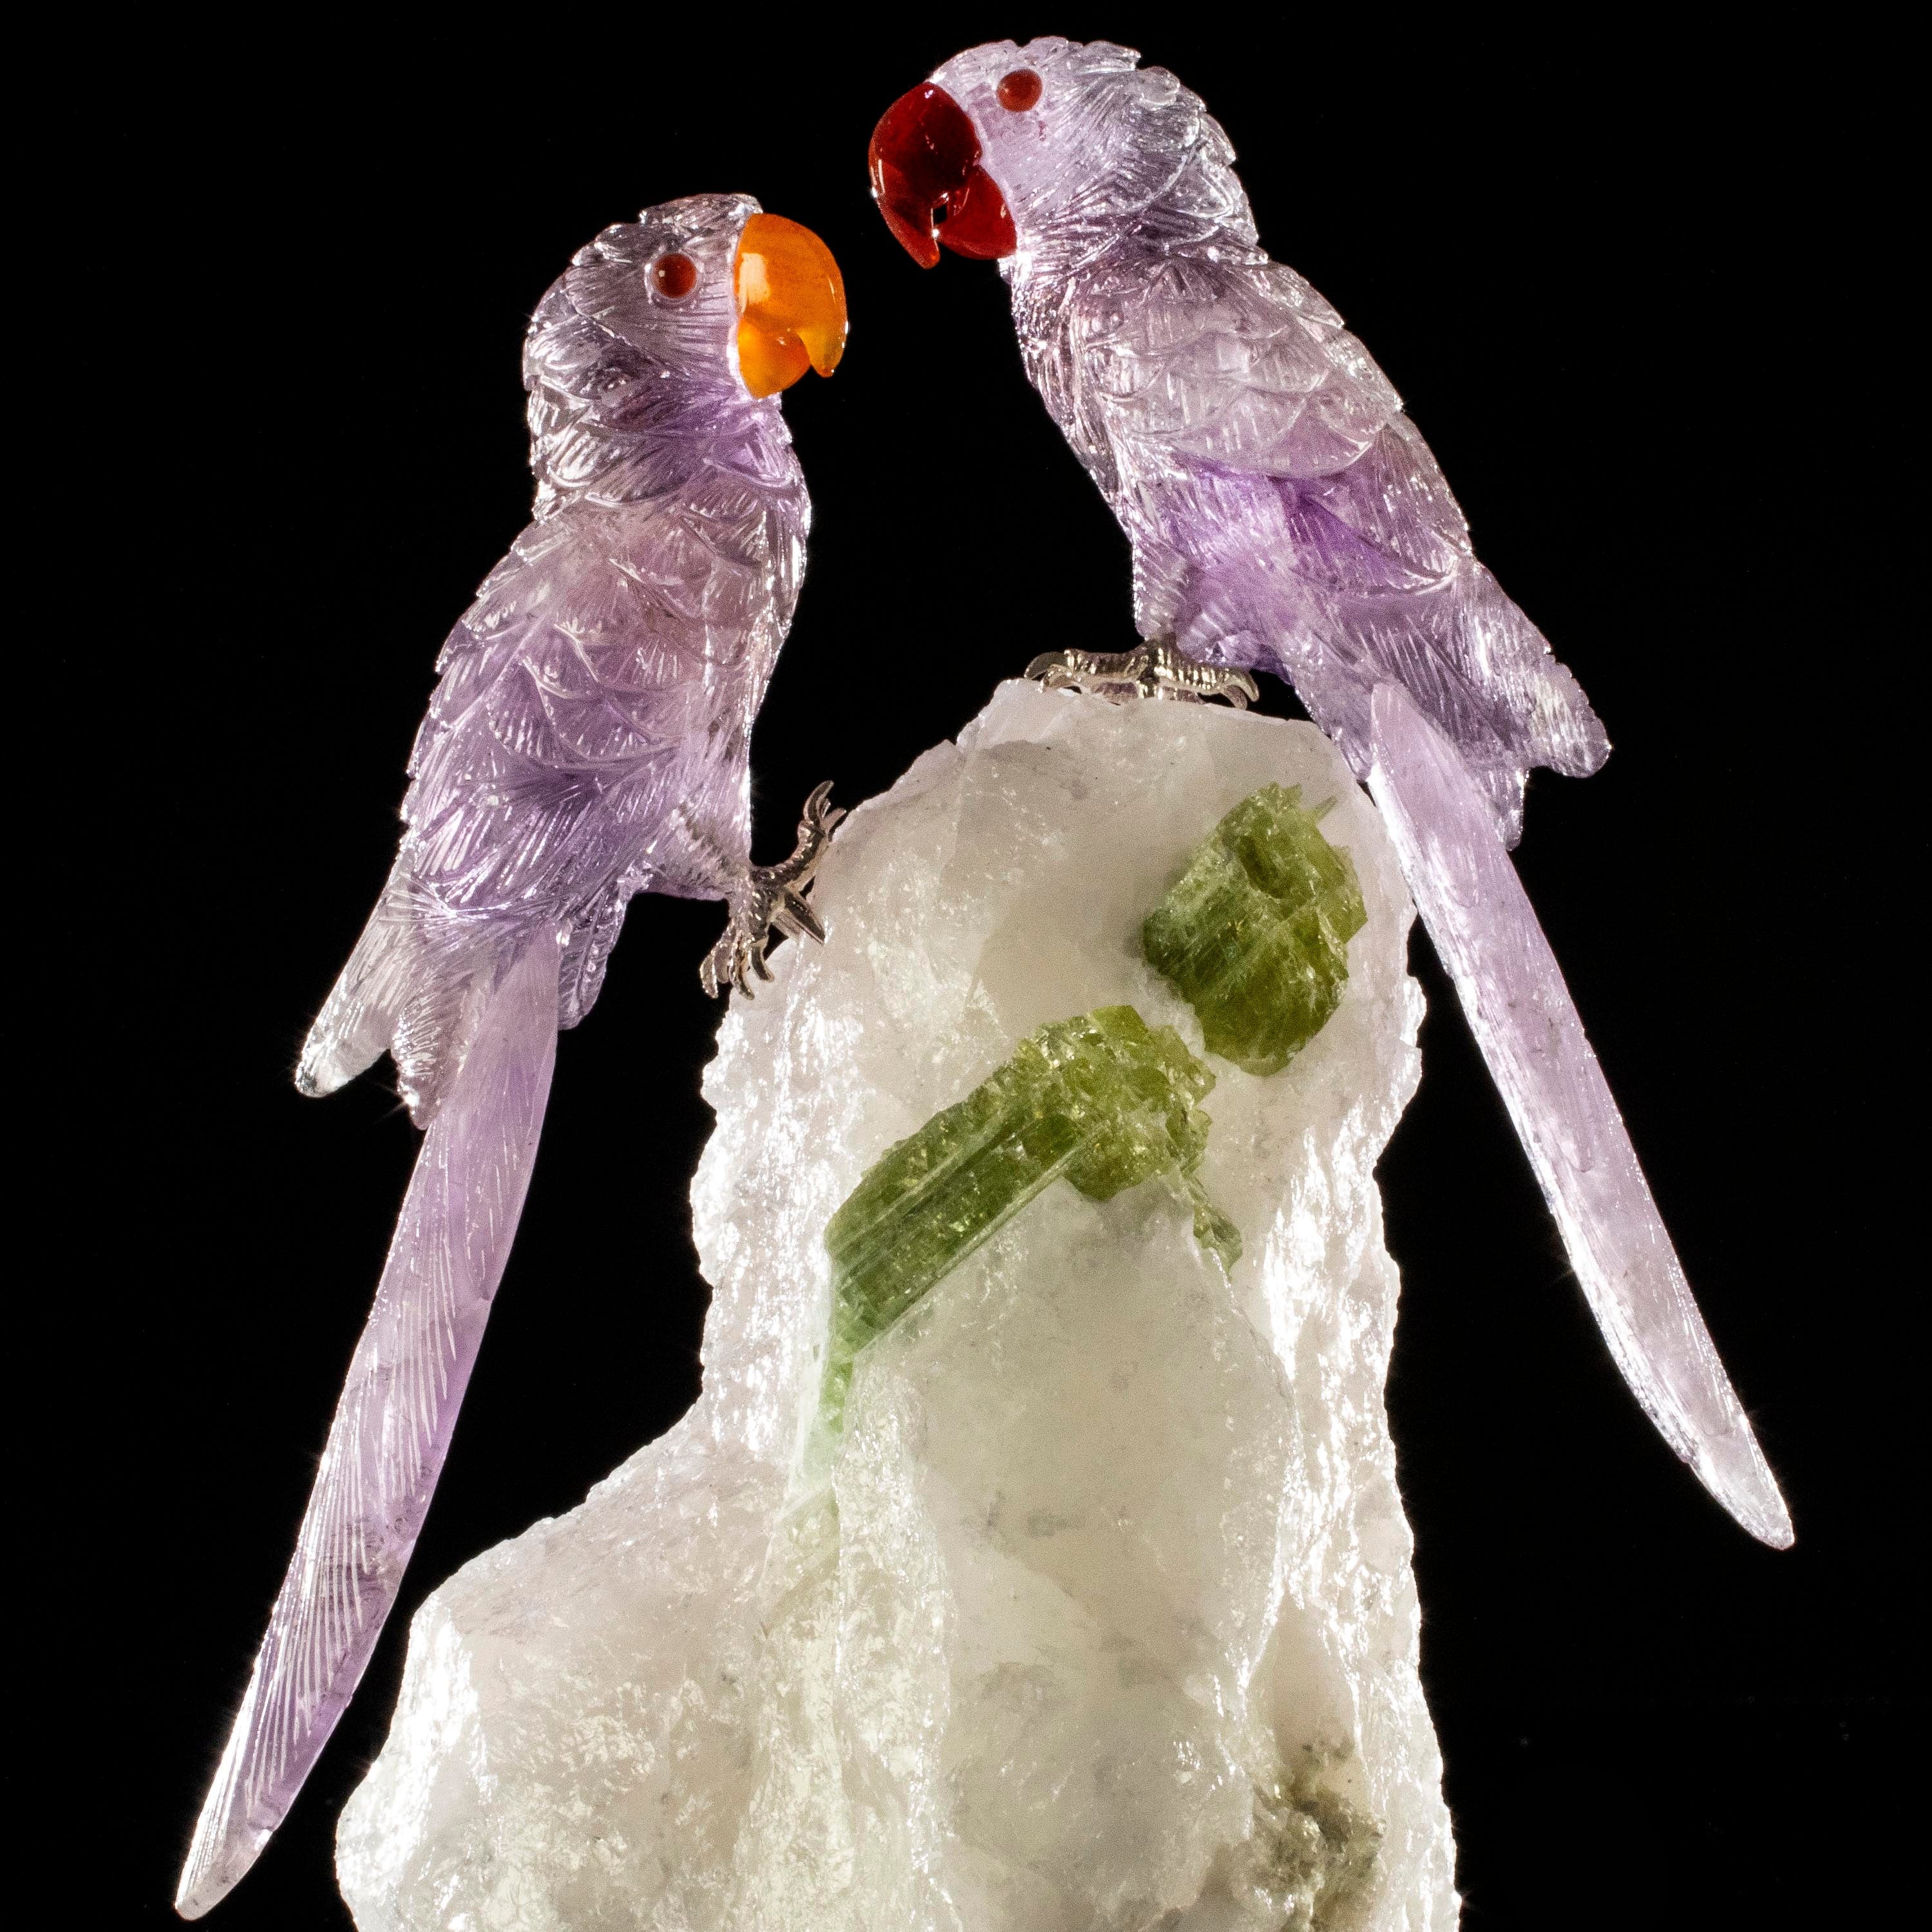 Kalifano Love Birds Carvings Amethyst Macaw Couple Love Birds Carving on Tourmaline Base LB.B201.003